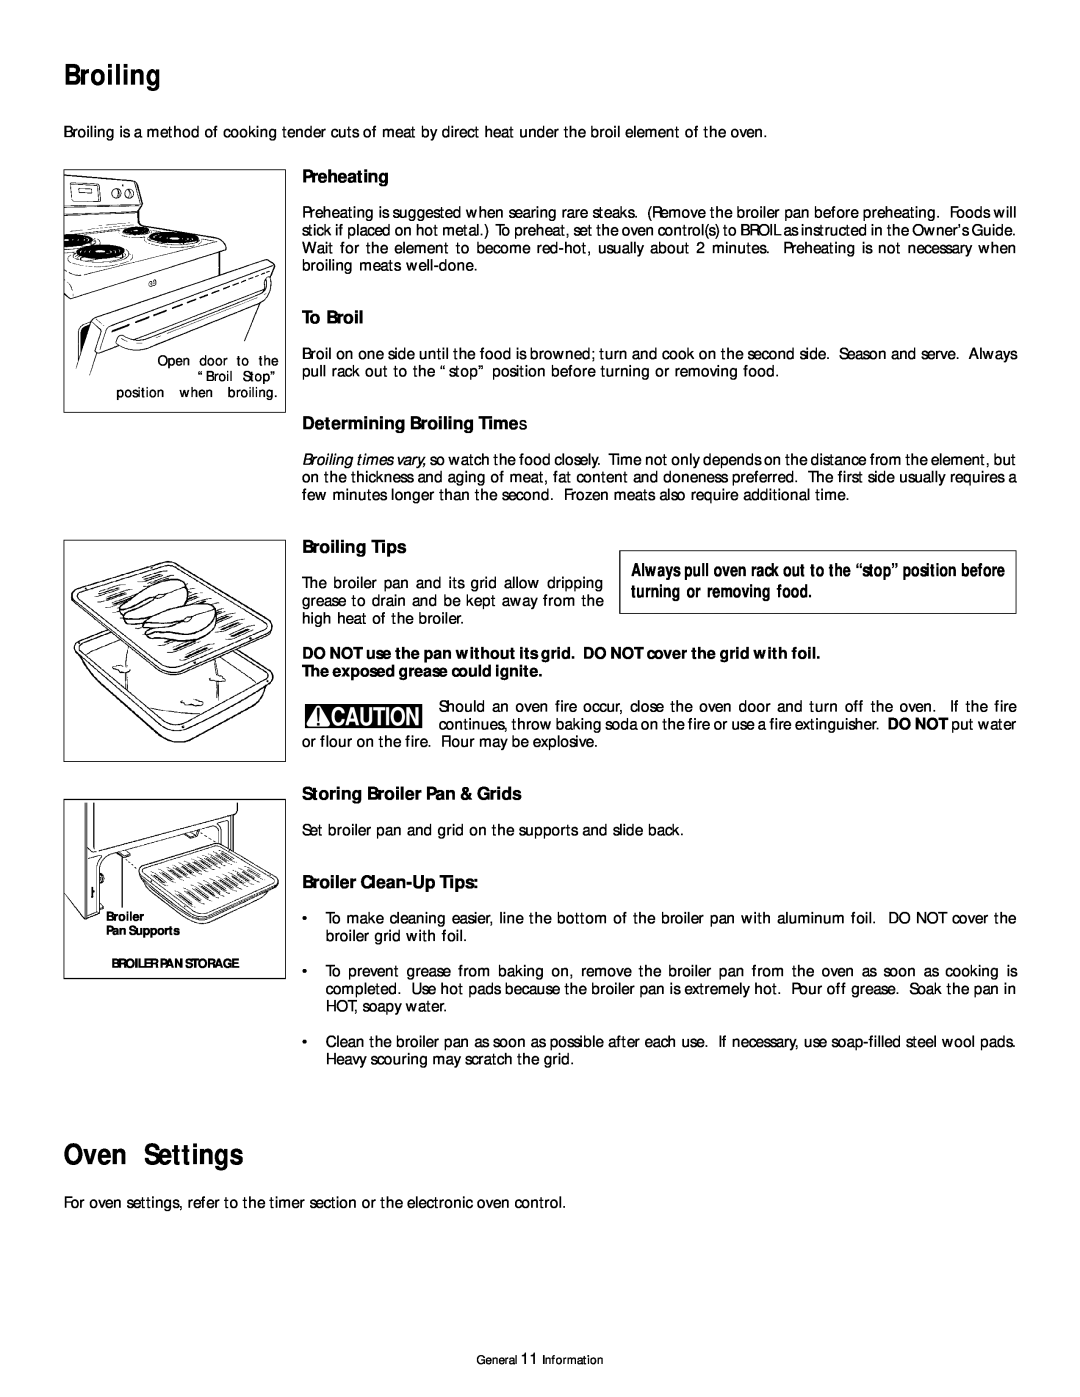 Frigidaire 318200407 manual Oven Settings, Preheating, To Broil, Determining Broiling Times, Broiling Tips 